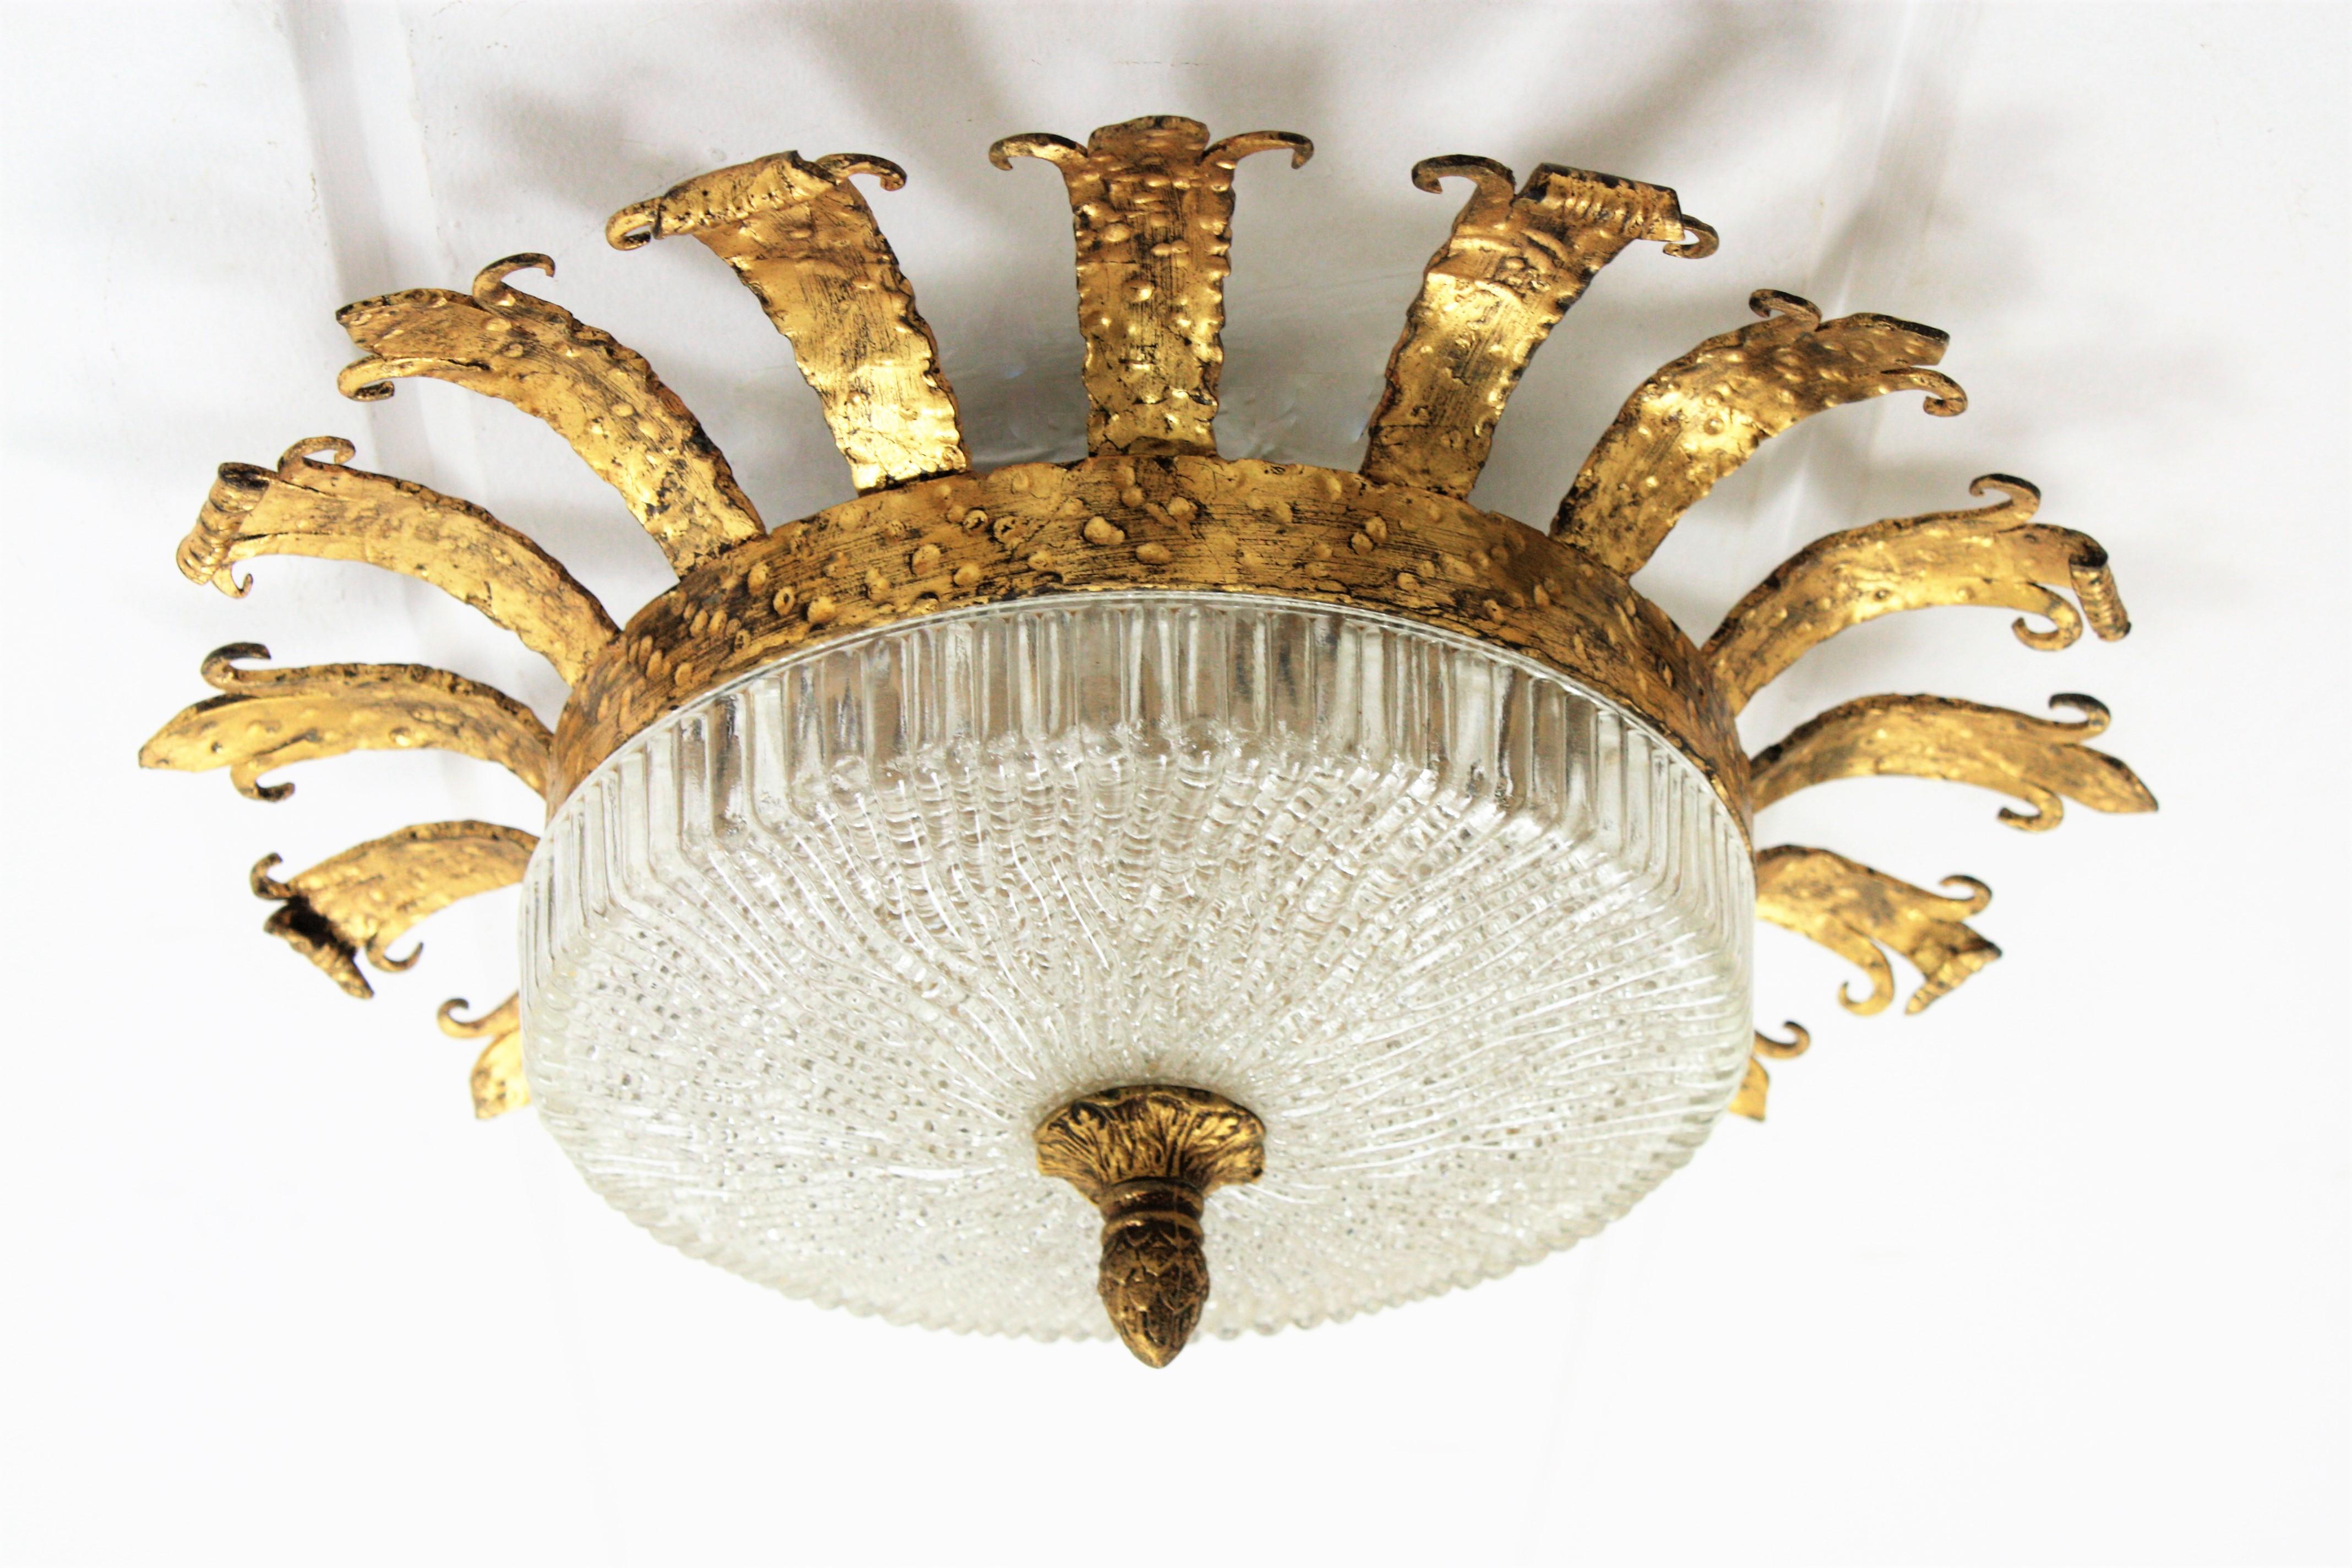 An sculptural hand-hammered iron and glass ceiling light fixture with neoclassical and Gothic Revival accents. A forged and gilded iron fixture with a fluted frosted glass shade with a gilt iron ornamented finial. This lamp has an highly decorative